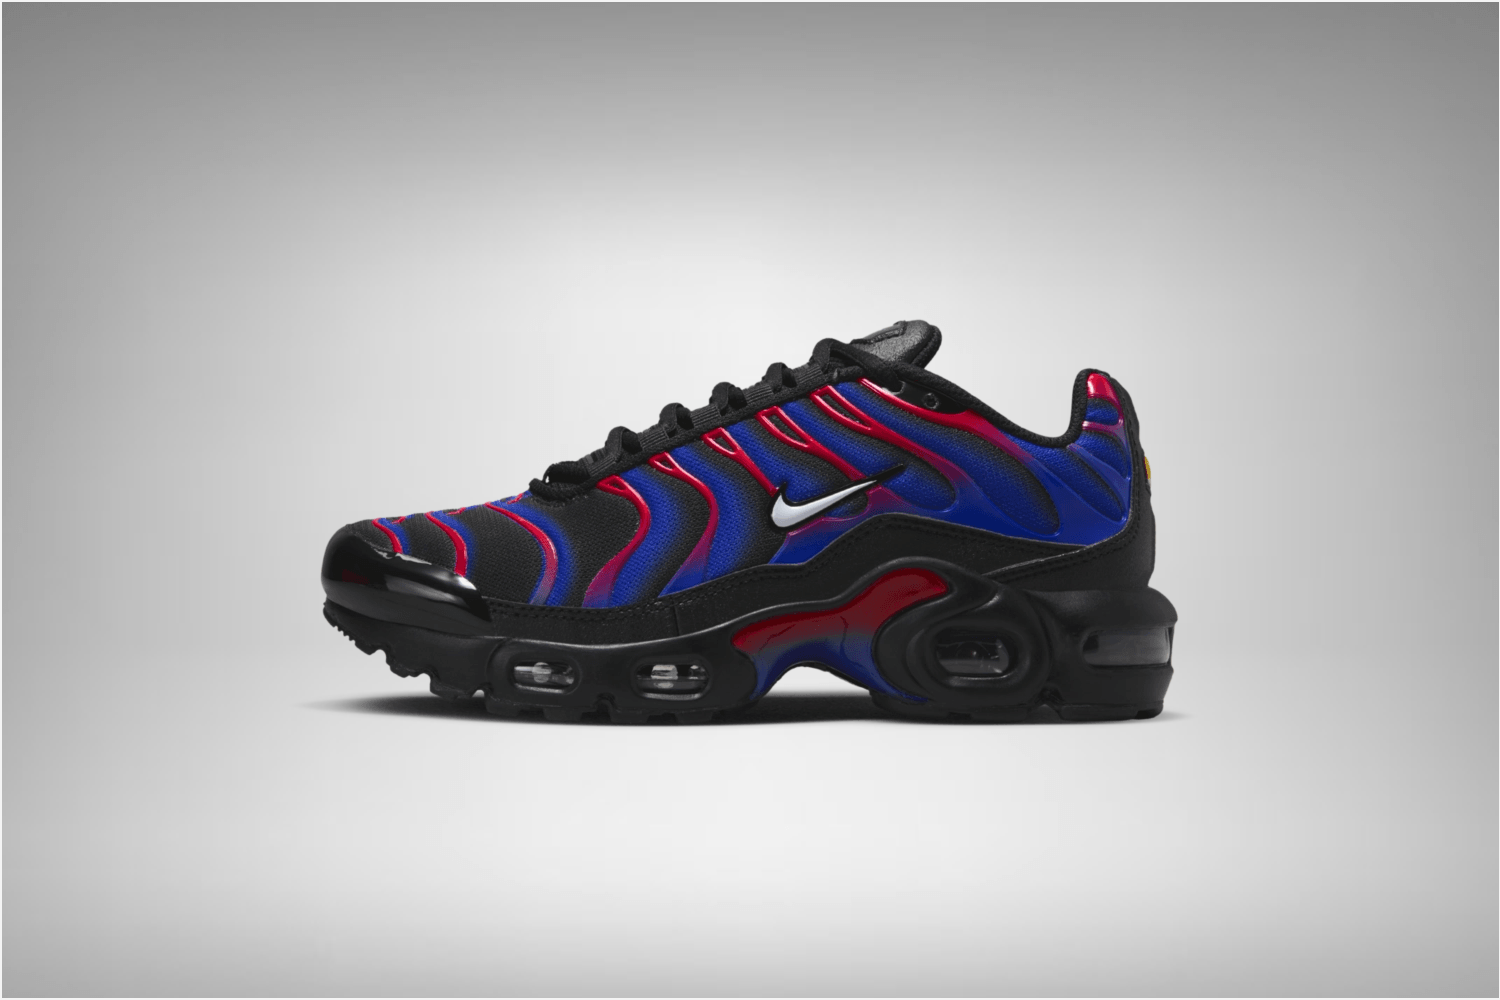 Nike Air Max Plus GS gets a SpiderMan colorway